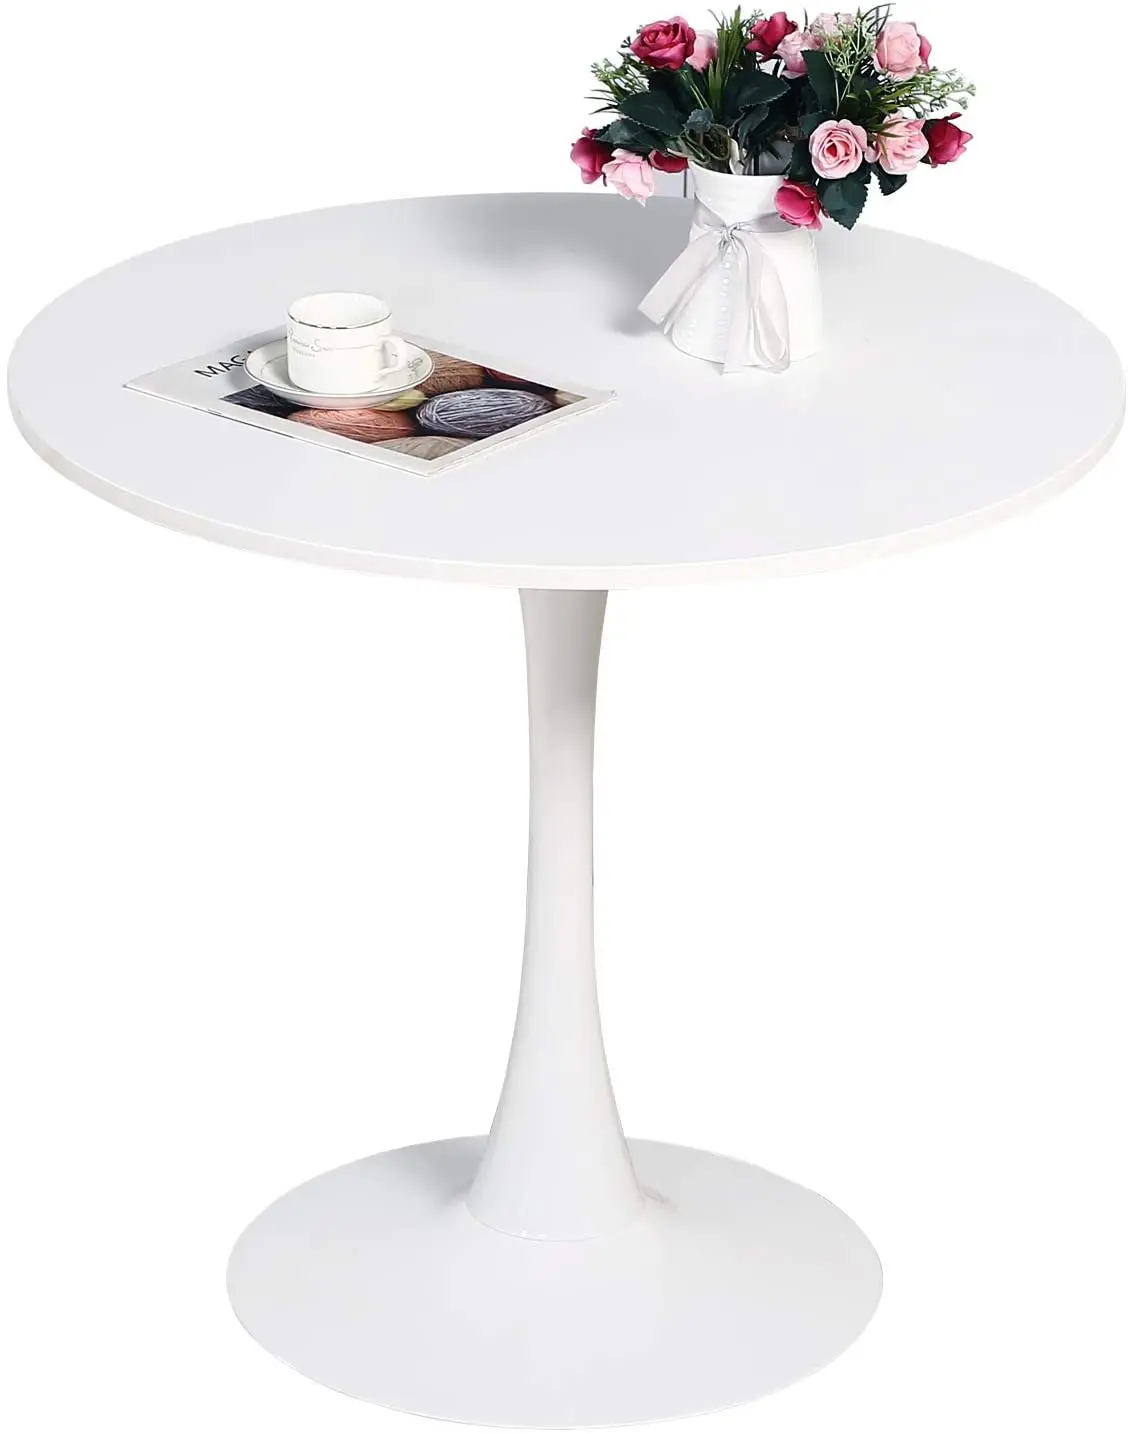 Offense hypocrisy rail Mid-century Modern Round Dining Table Coffee Table With Round Top And  Pedestal Base In White - Buy Mid-century Modern Round Dining Table,Coffee  Table With Round Top And Pedestal Base,Dining Table Coffee Table